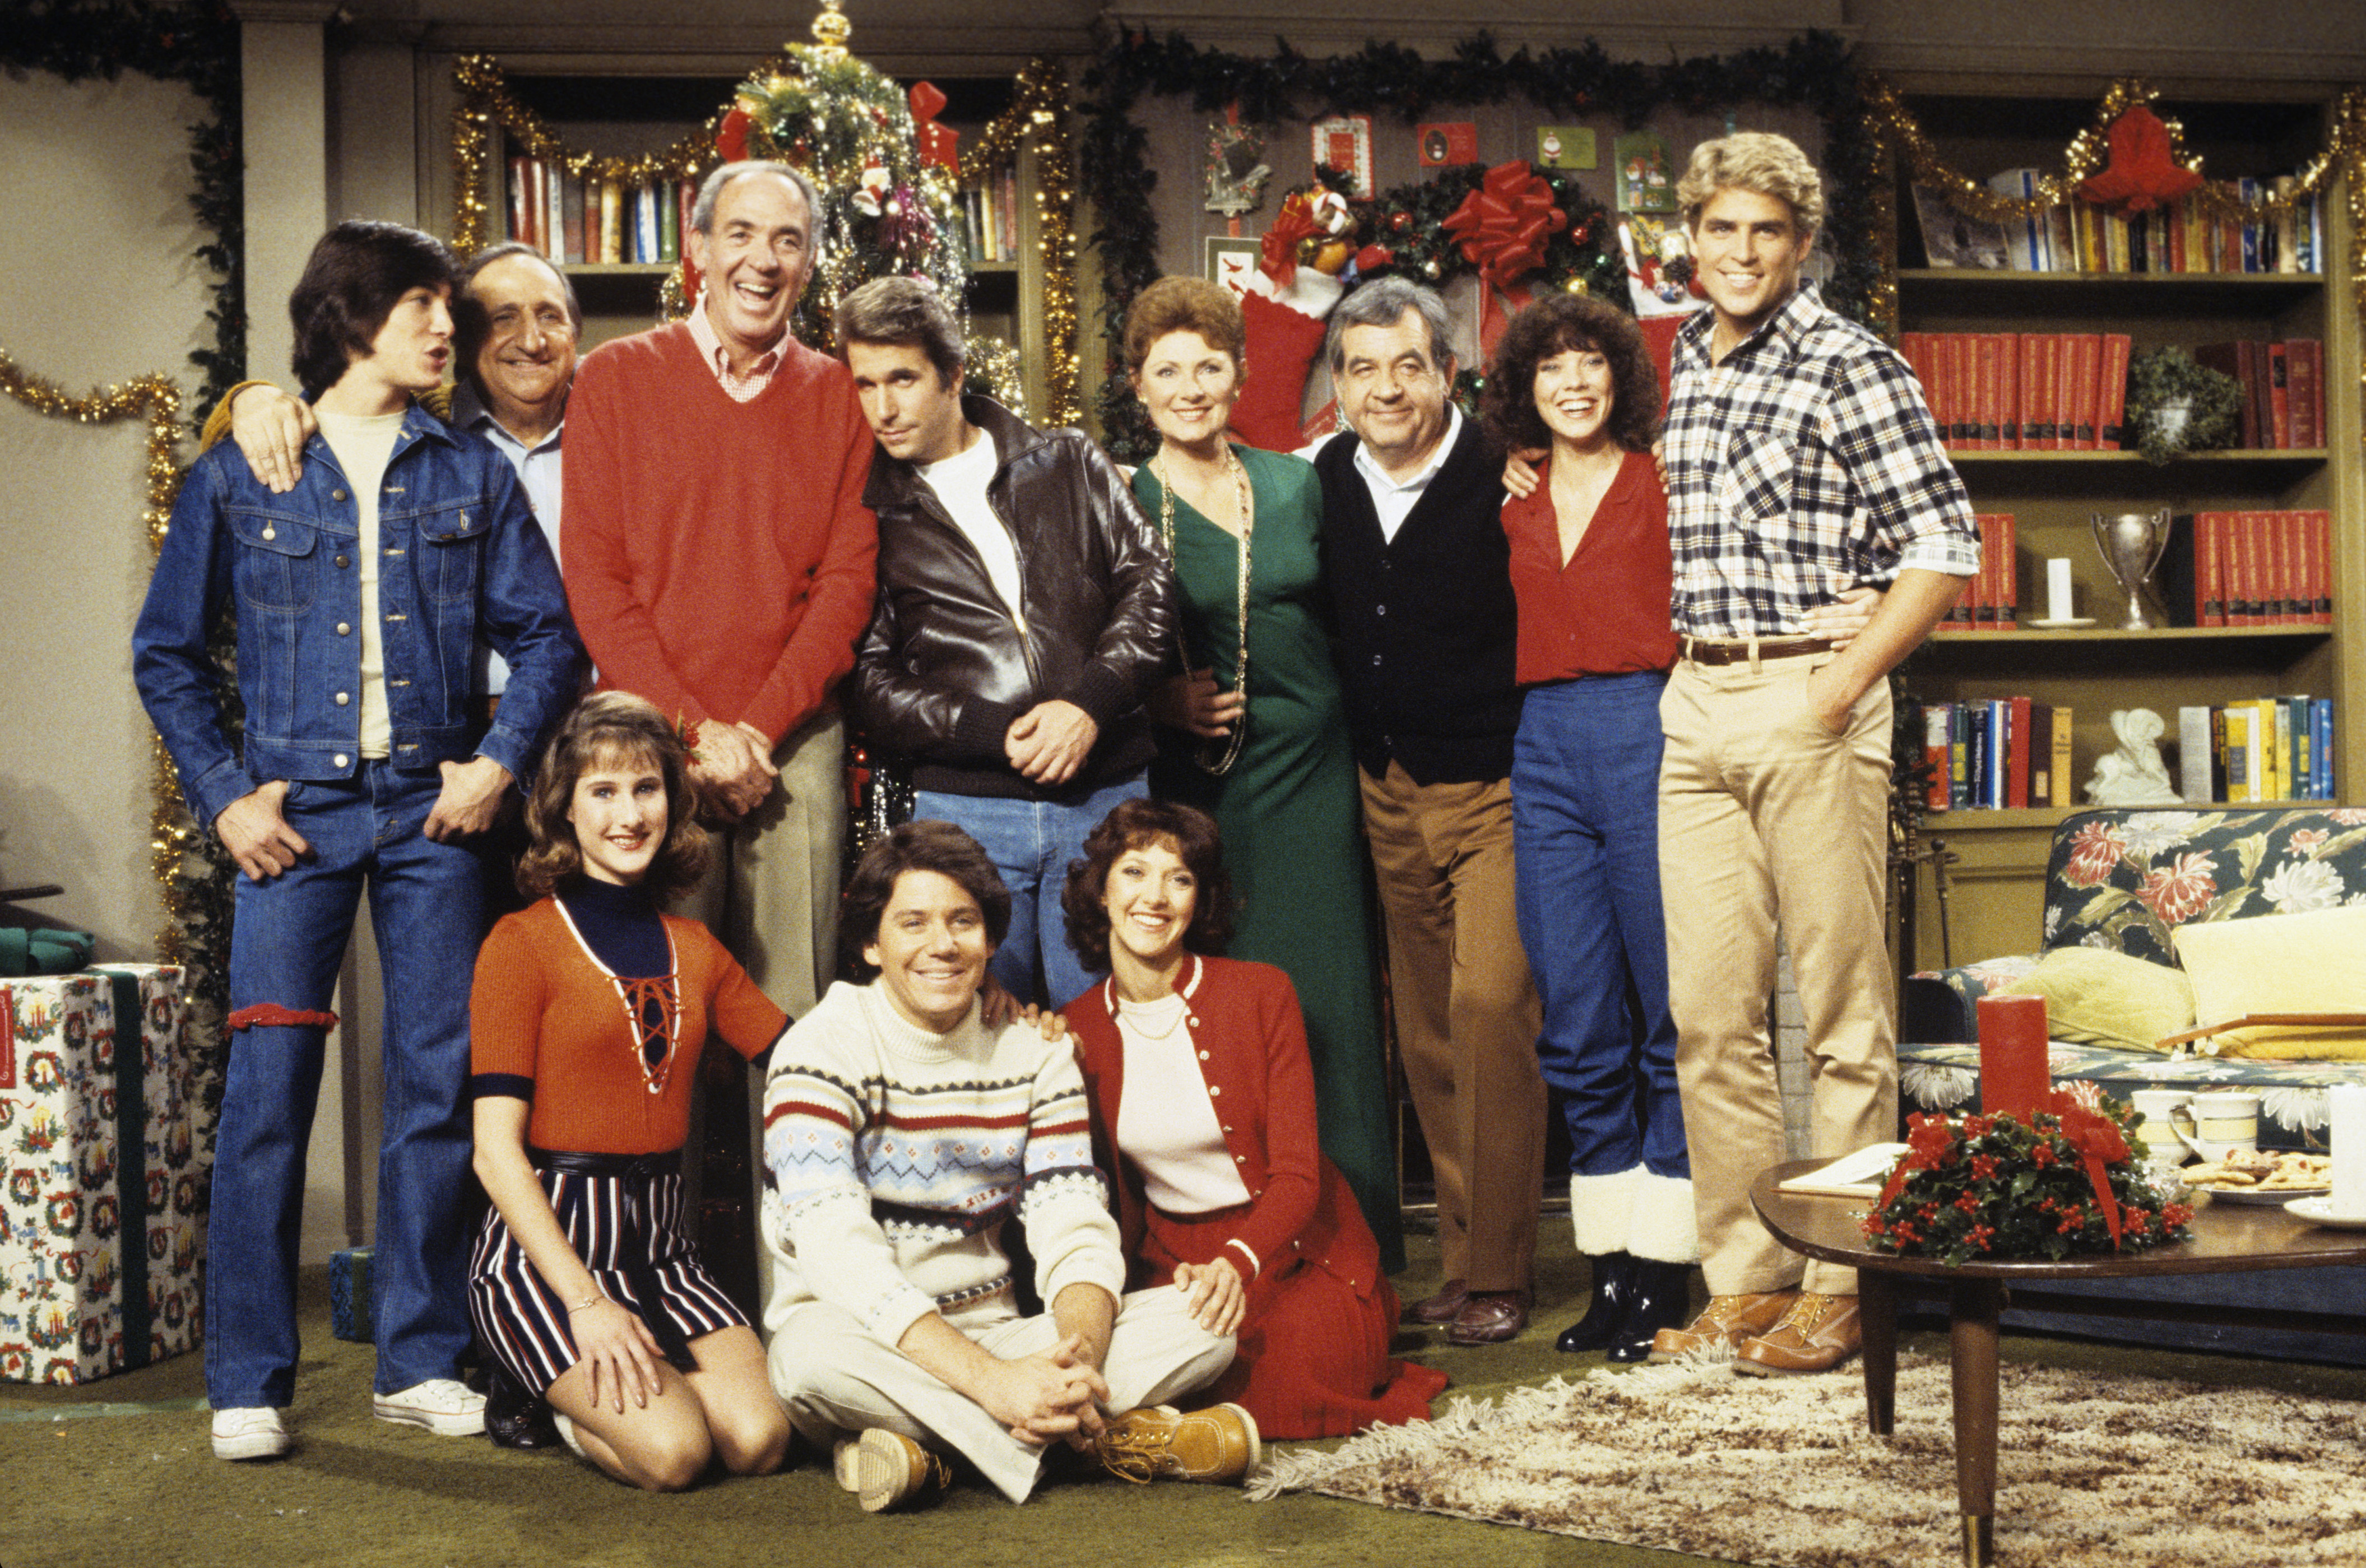 Actress Erin Moran (second standing from the right) and co-stars on the set of "Happy Days" on December 16, 1980 | Source: Getty Images